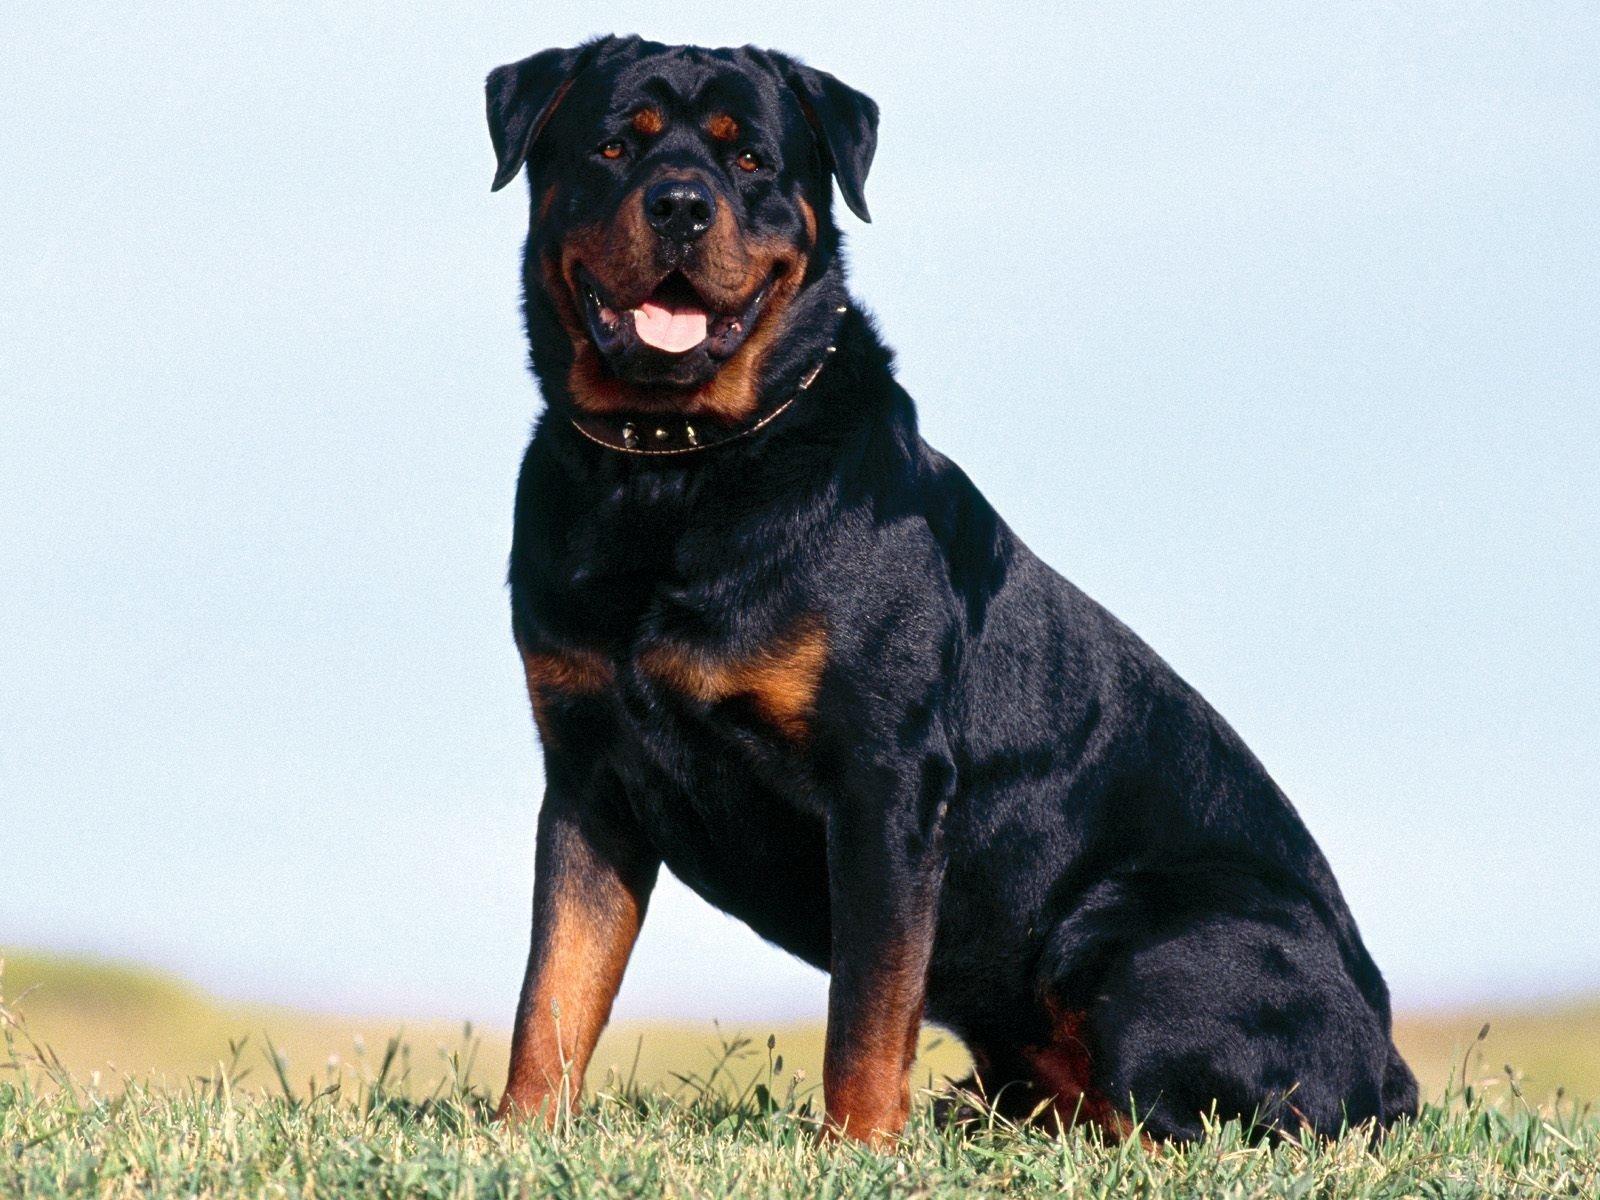 rottweiler puppy Wallpaper -- HD Wallpapers of rottweiler  puppy!:Amazon.co.uk:Appstore for Android